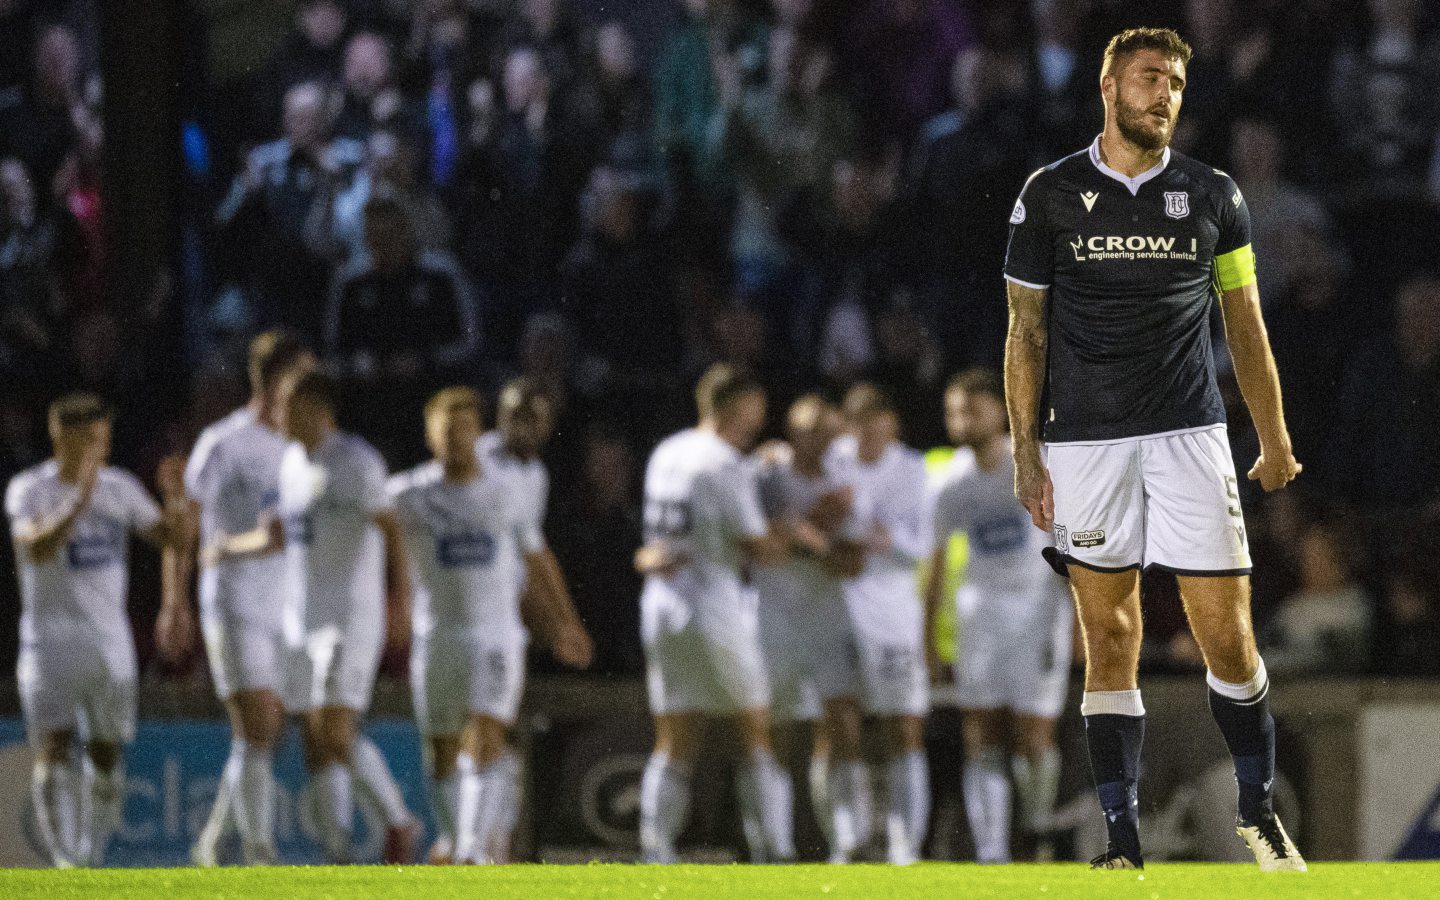 Dundee need to bury their chances. They found out the hard way against Ayr